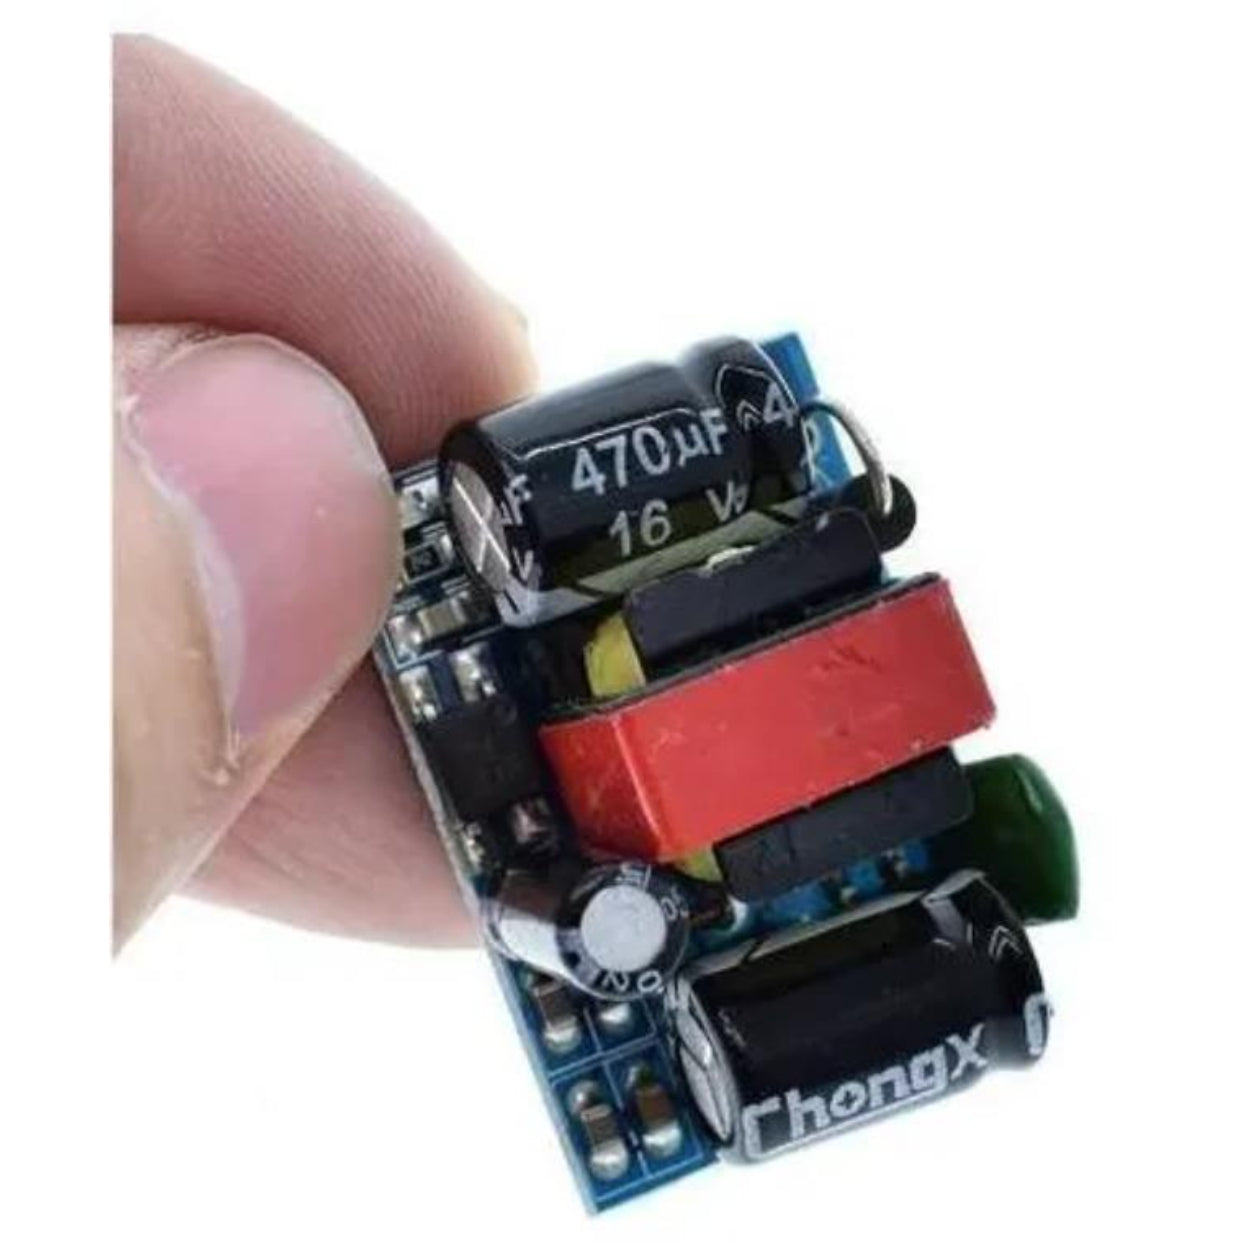 AC-DC 5V 500mA 2.5W Isolated Switching Power Supply Module 220V to 5V Buck Step Down Module